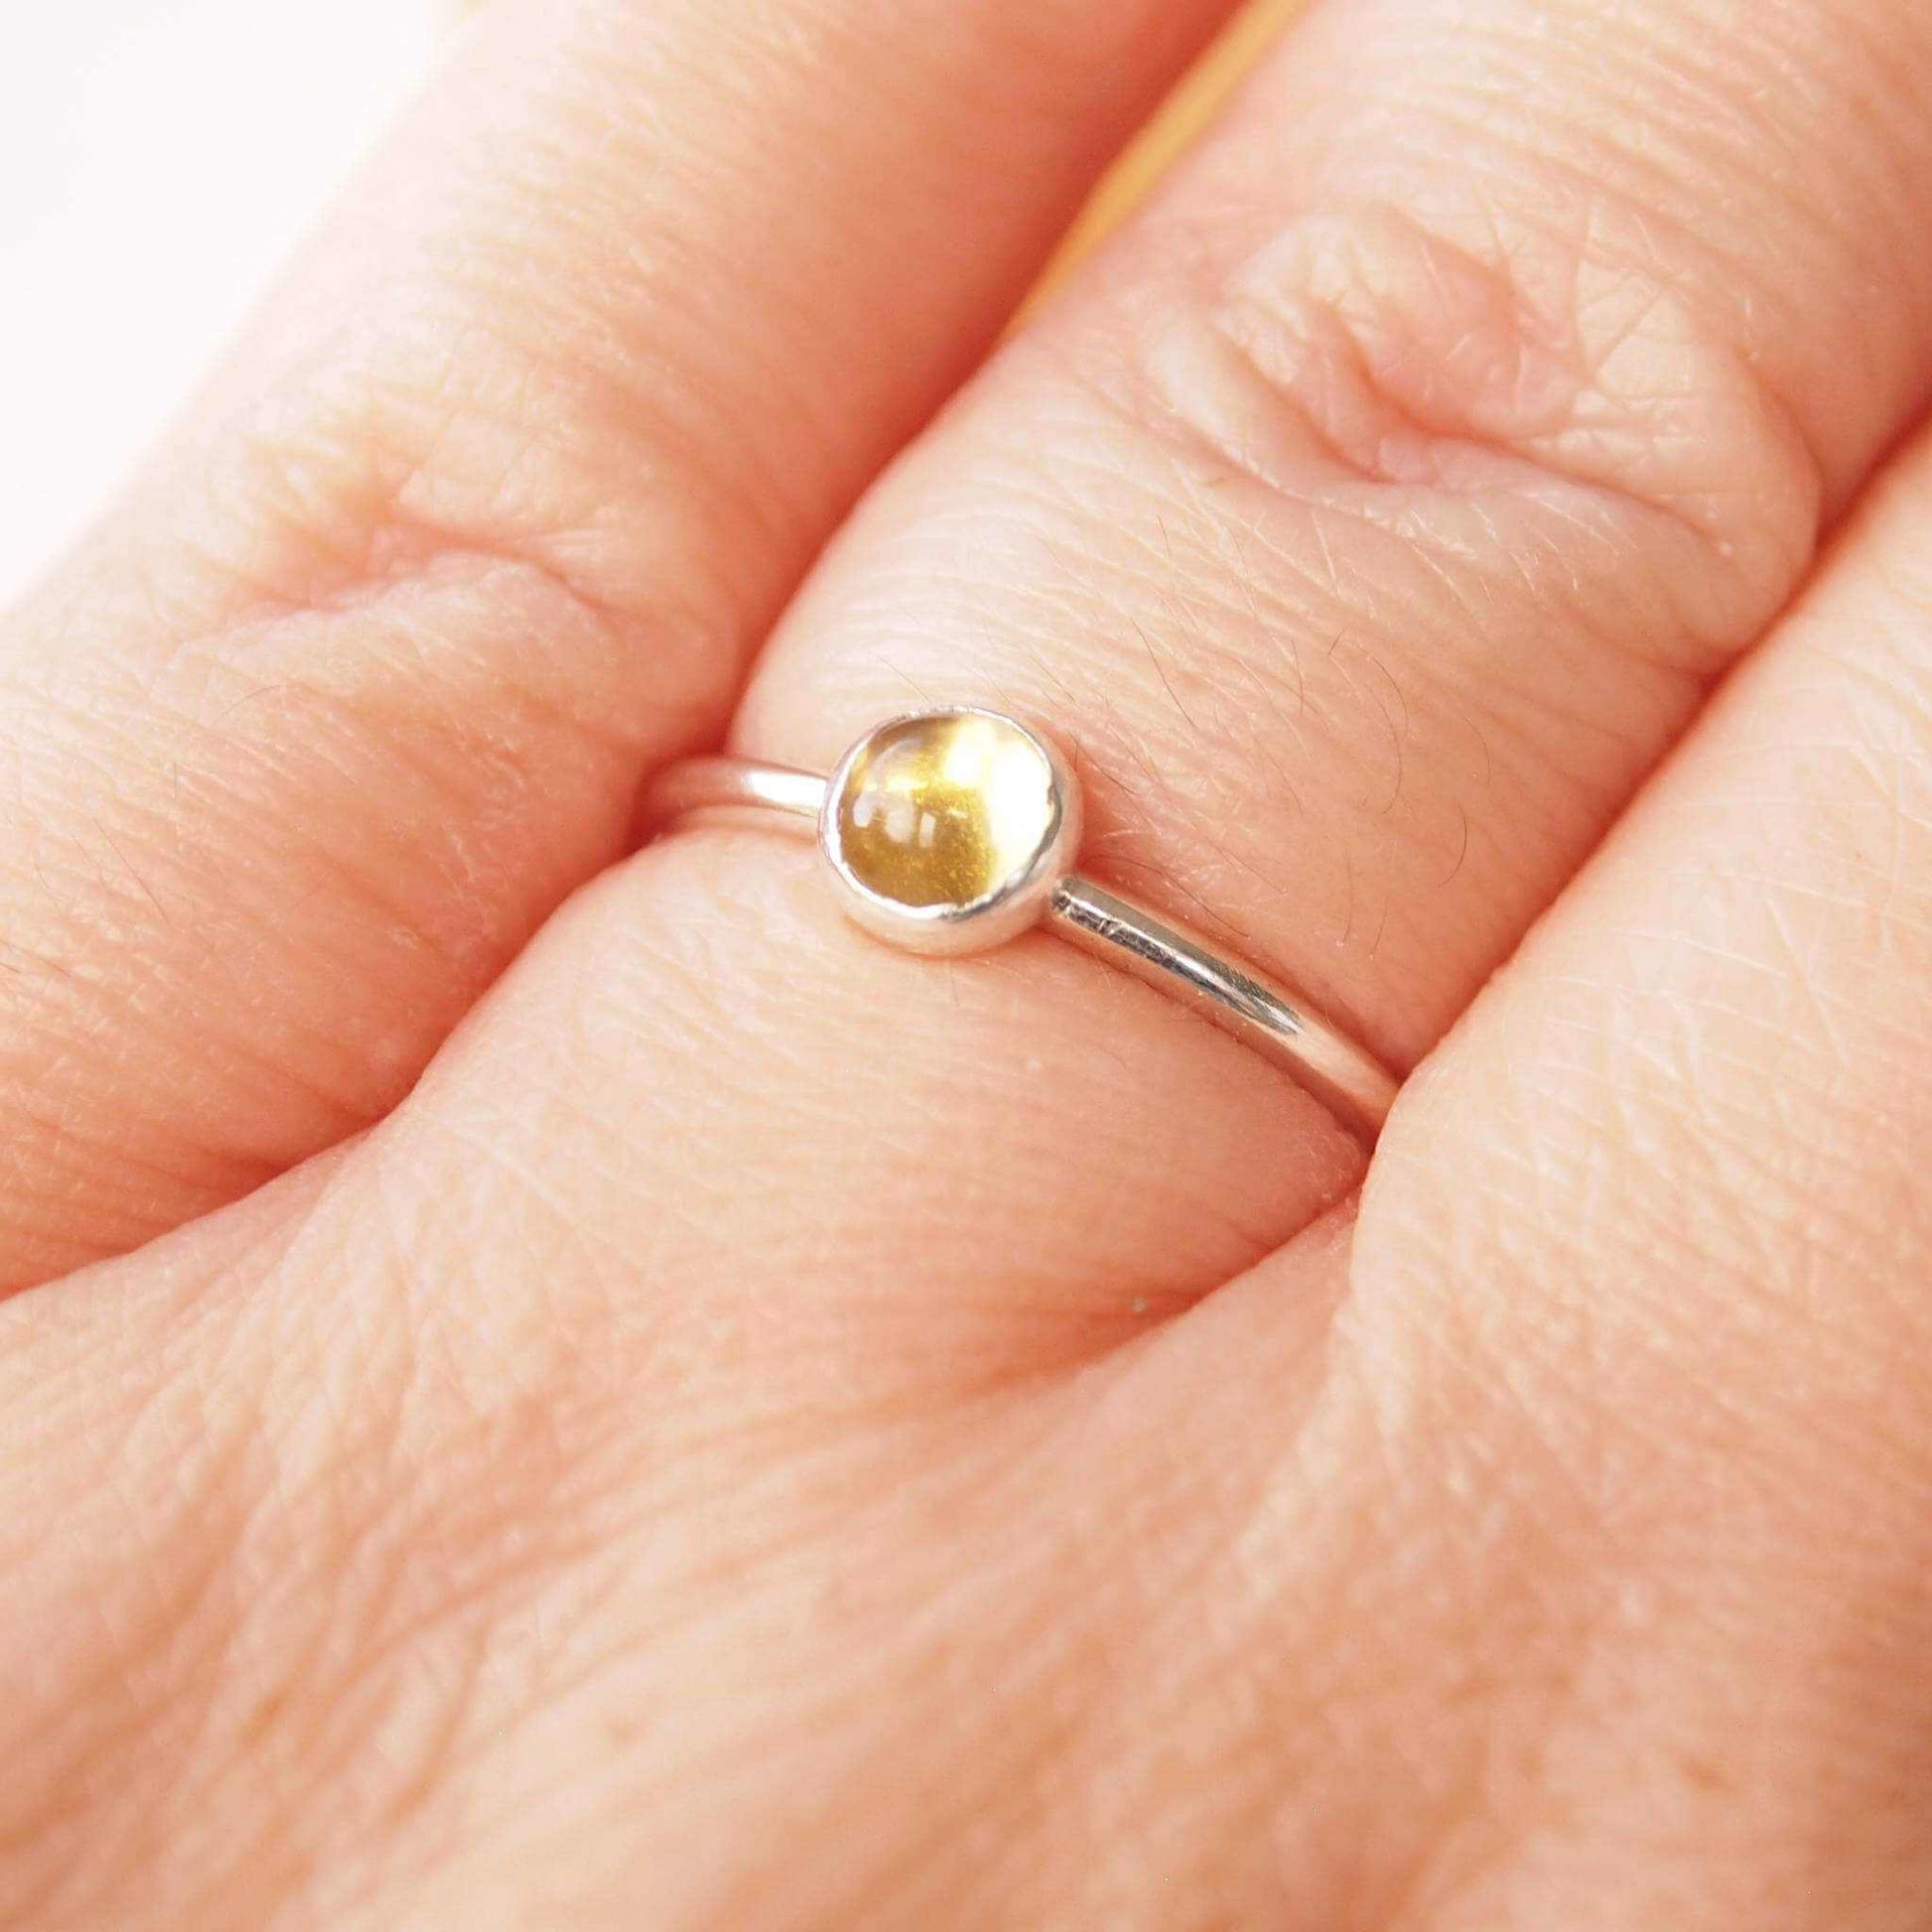 Citrine and Sterling Silver Ring made from a 5mm round warm yellow citrine gemstone set simply onto a modern band of round wire. Handmade to your ring size by maram jewellery in Scotland